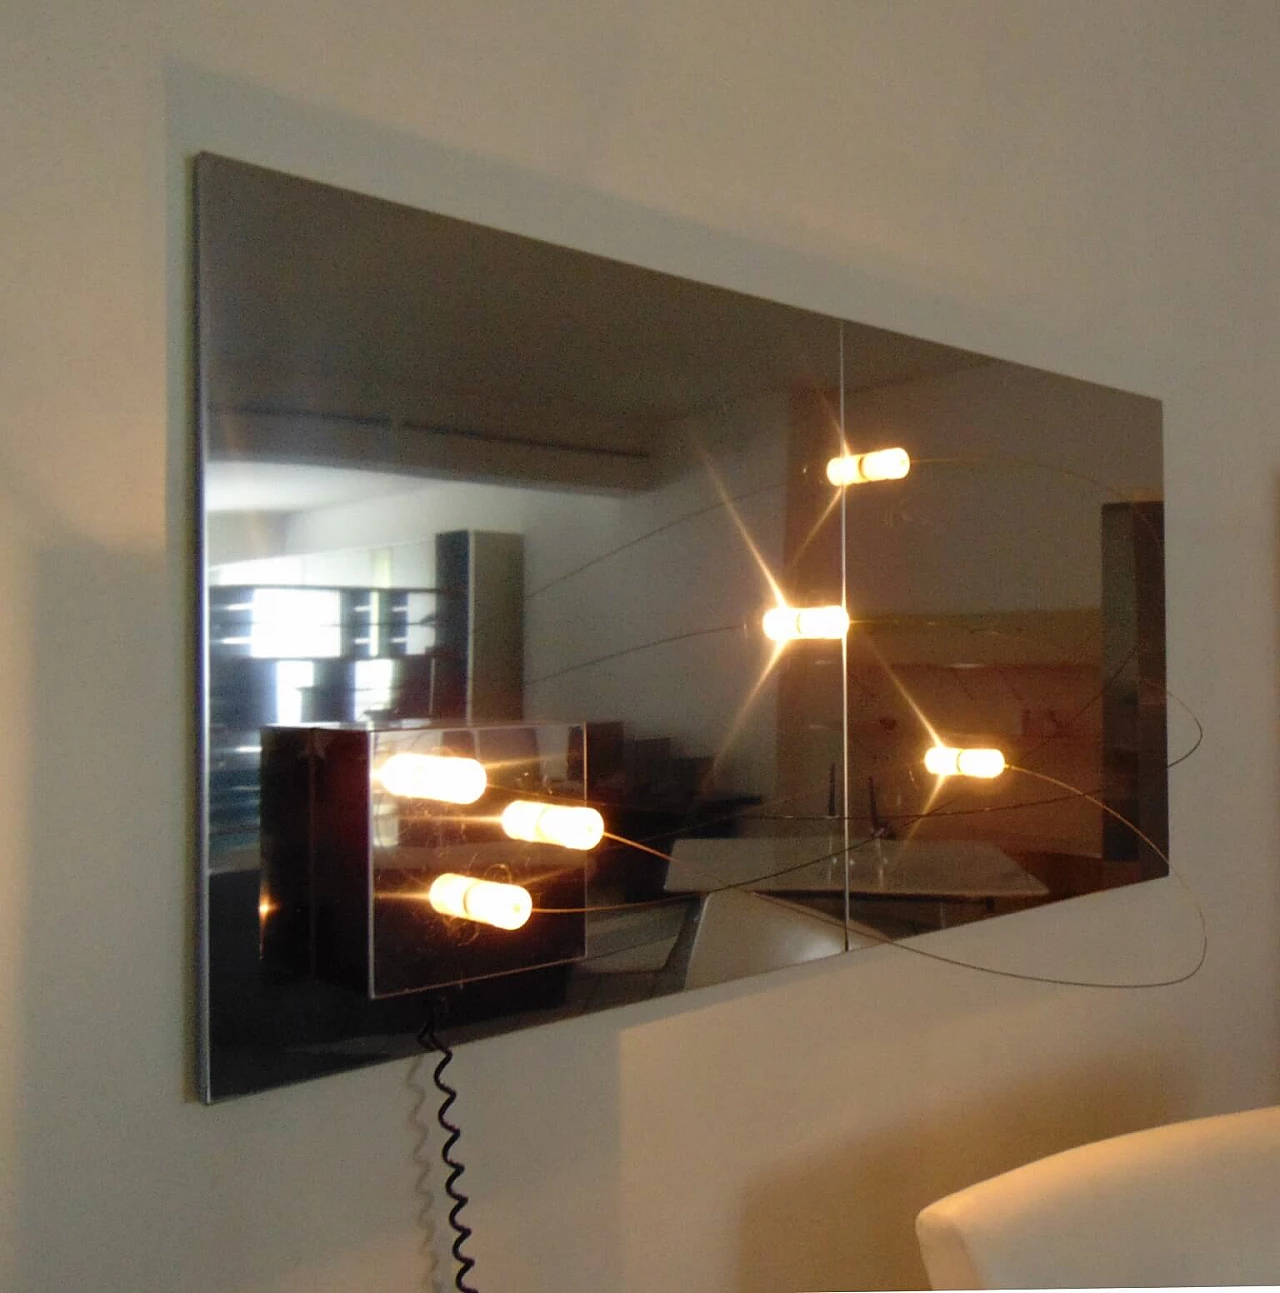 Mirrored Wall Lamp with Magnetic Movable Lights by ARDITI, Sormani Nucleo, Italy 1069183